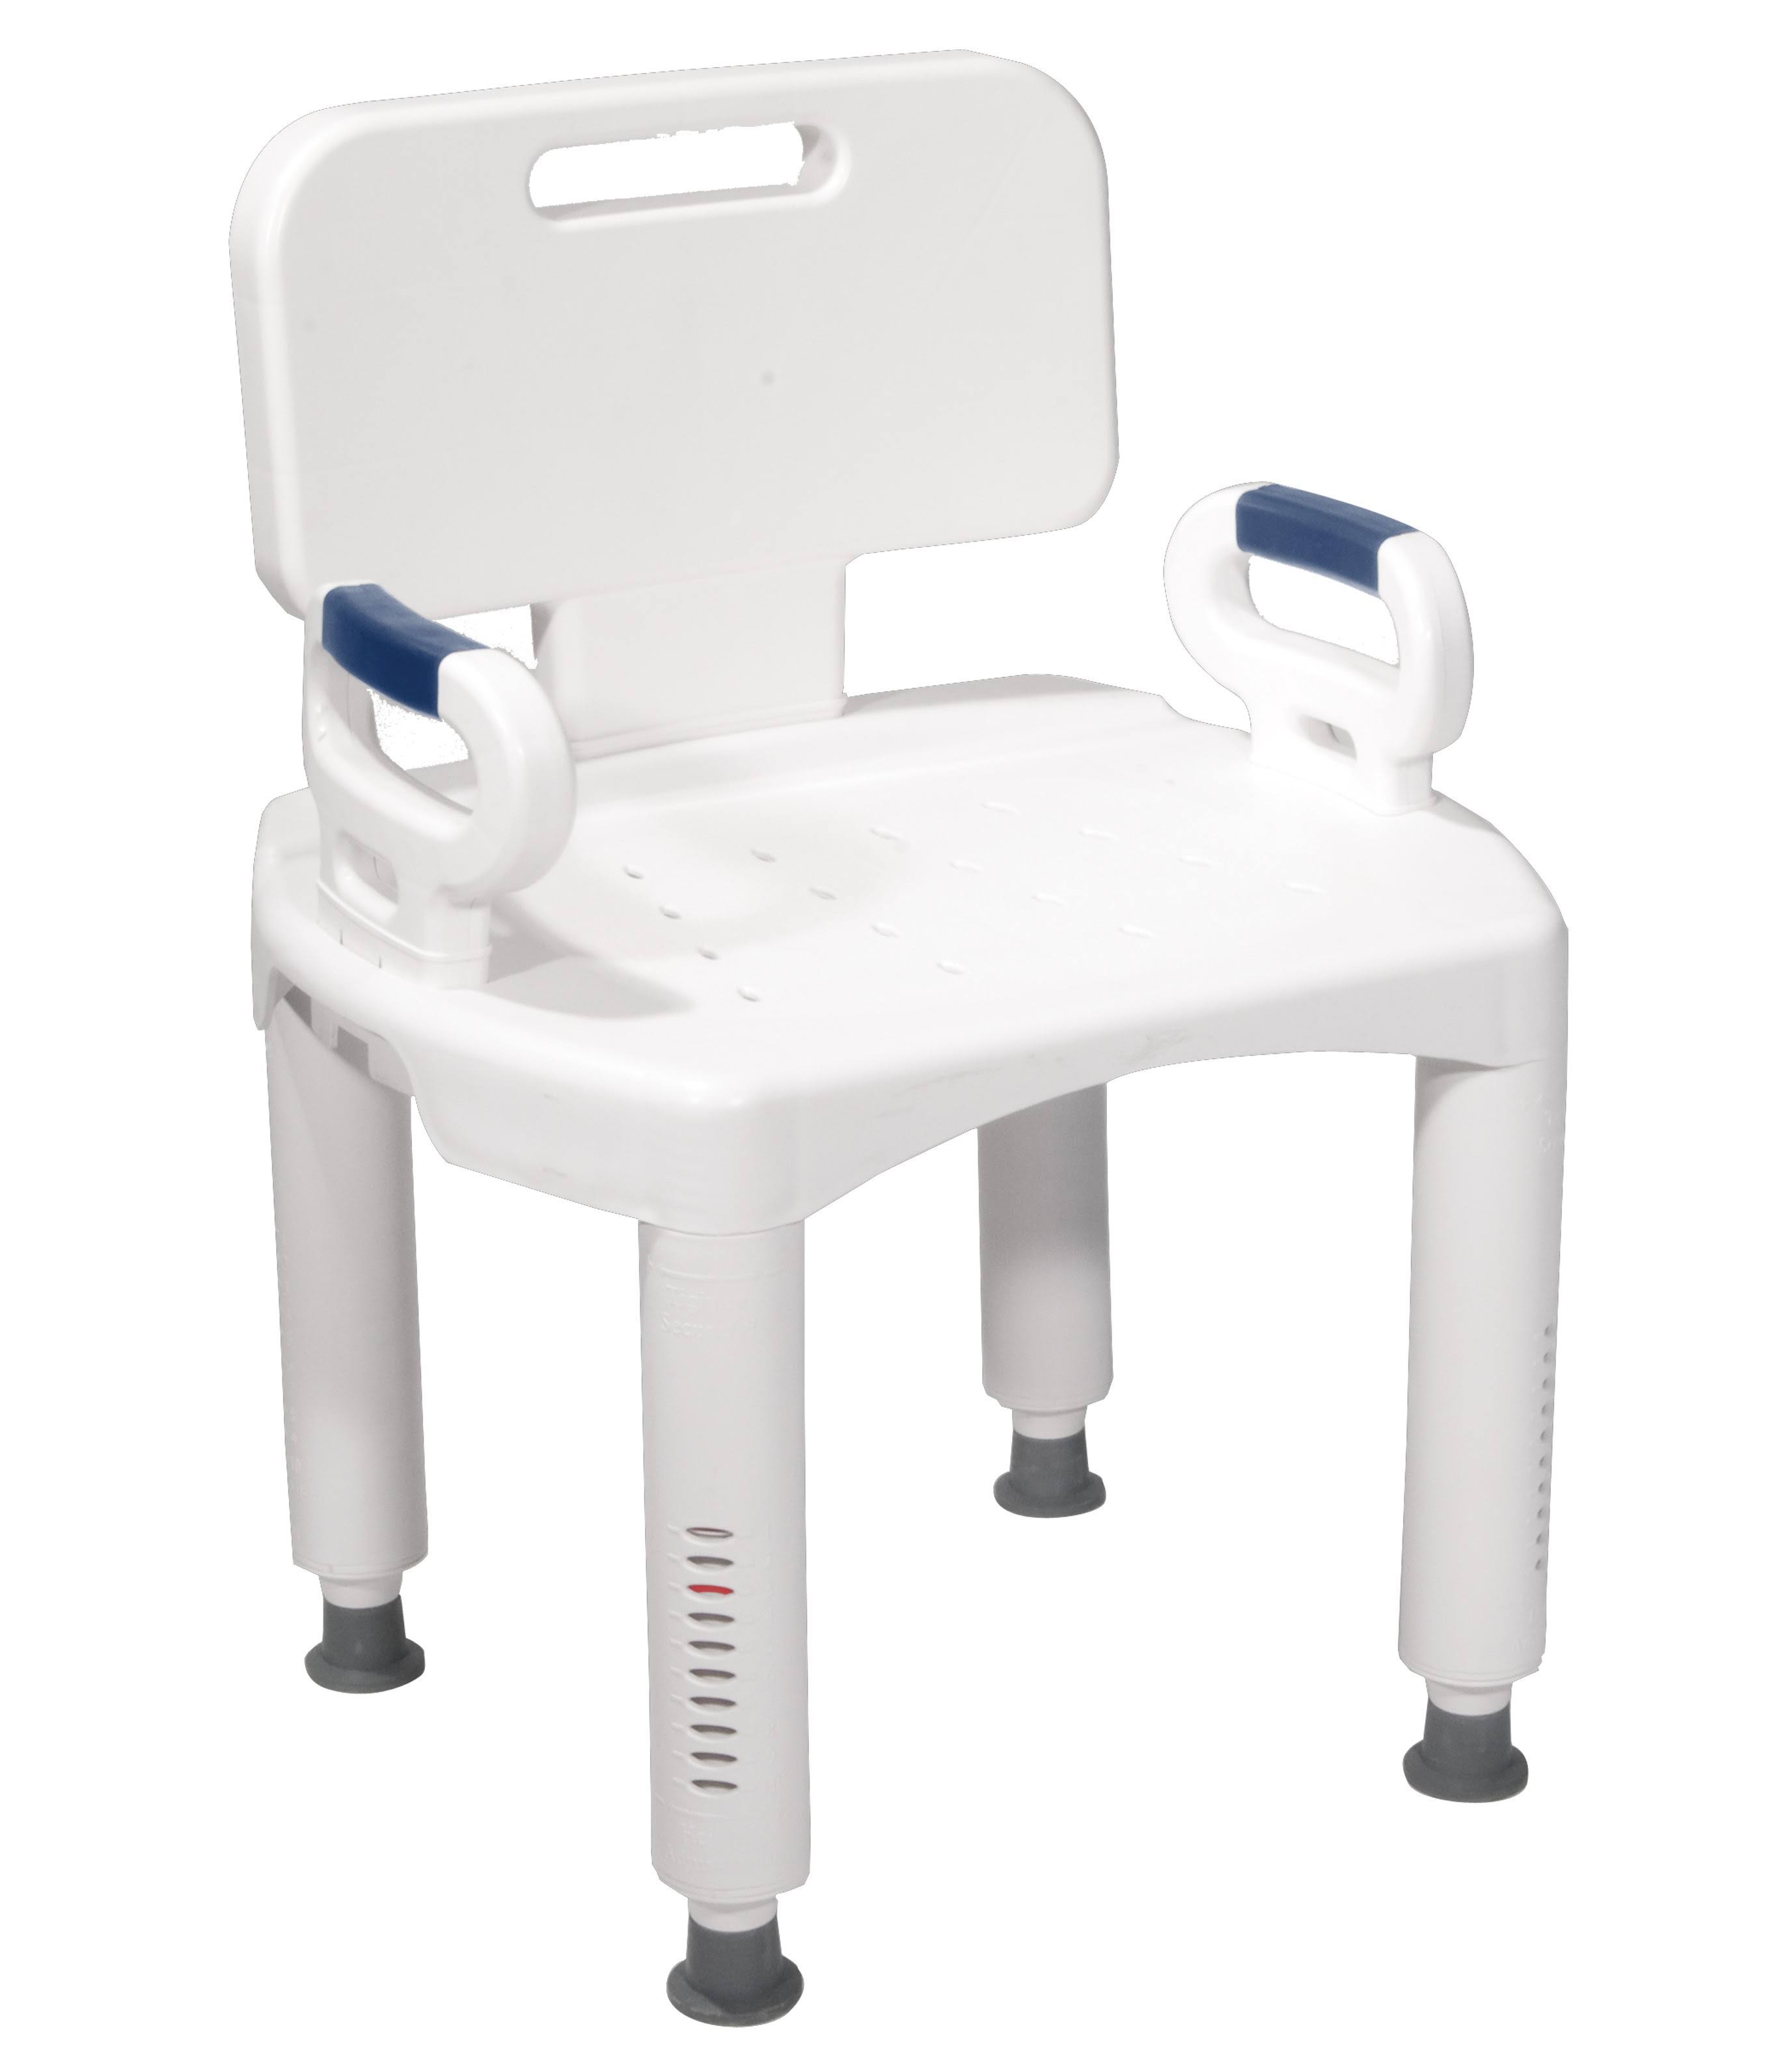 McKesson Plastic Bath Bench with Removable BACK, 21.25 inch Seat Width, 350 lbs Weight Capacity, 1 CT, Adult Unisex, Size: One size, White